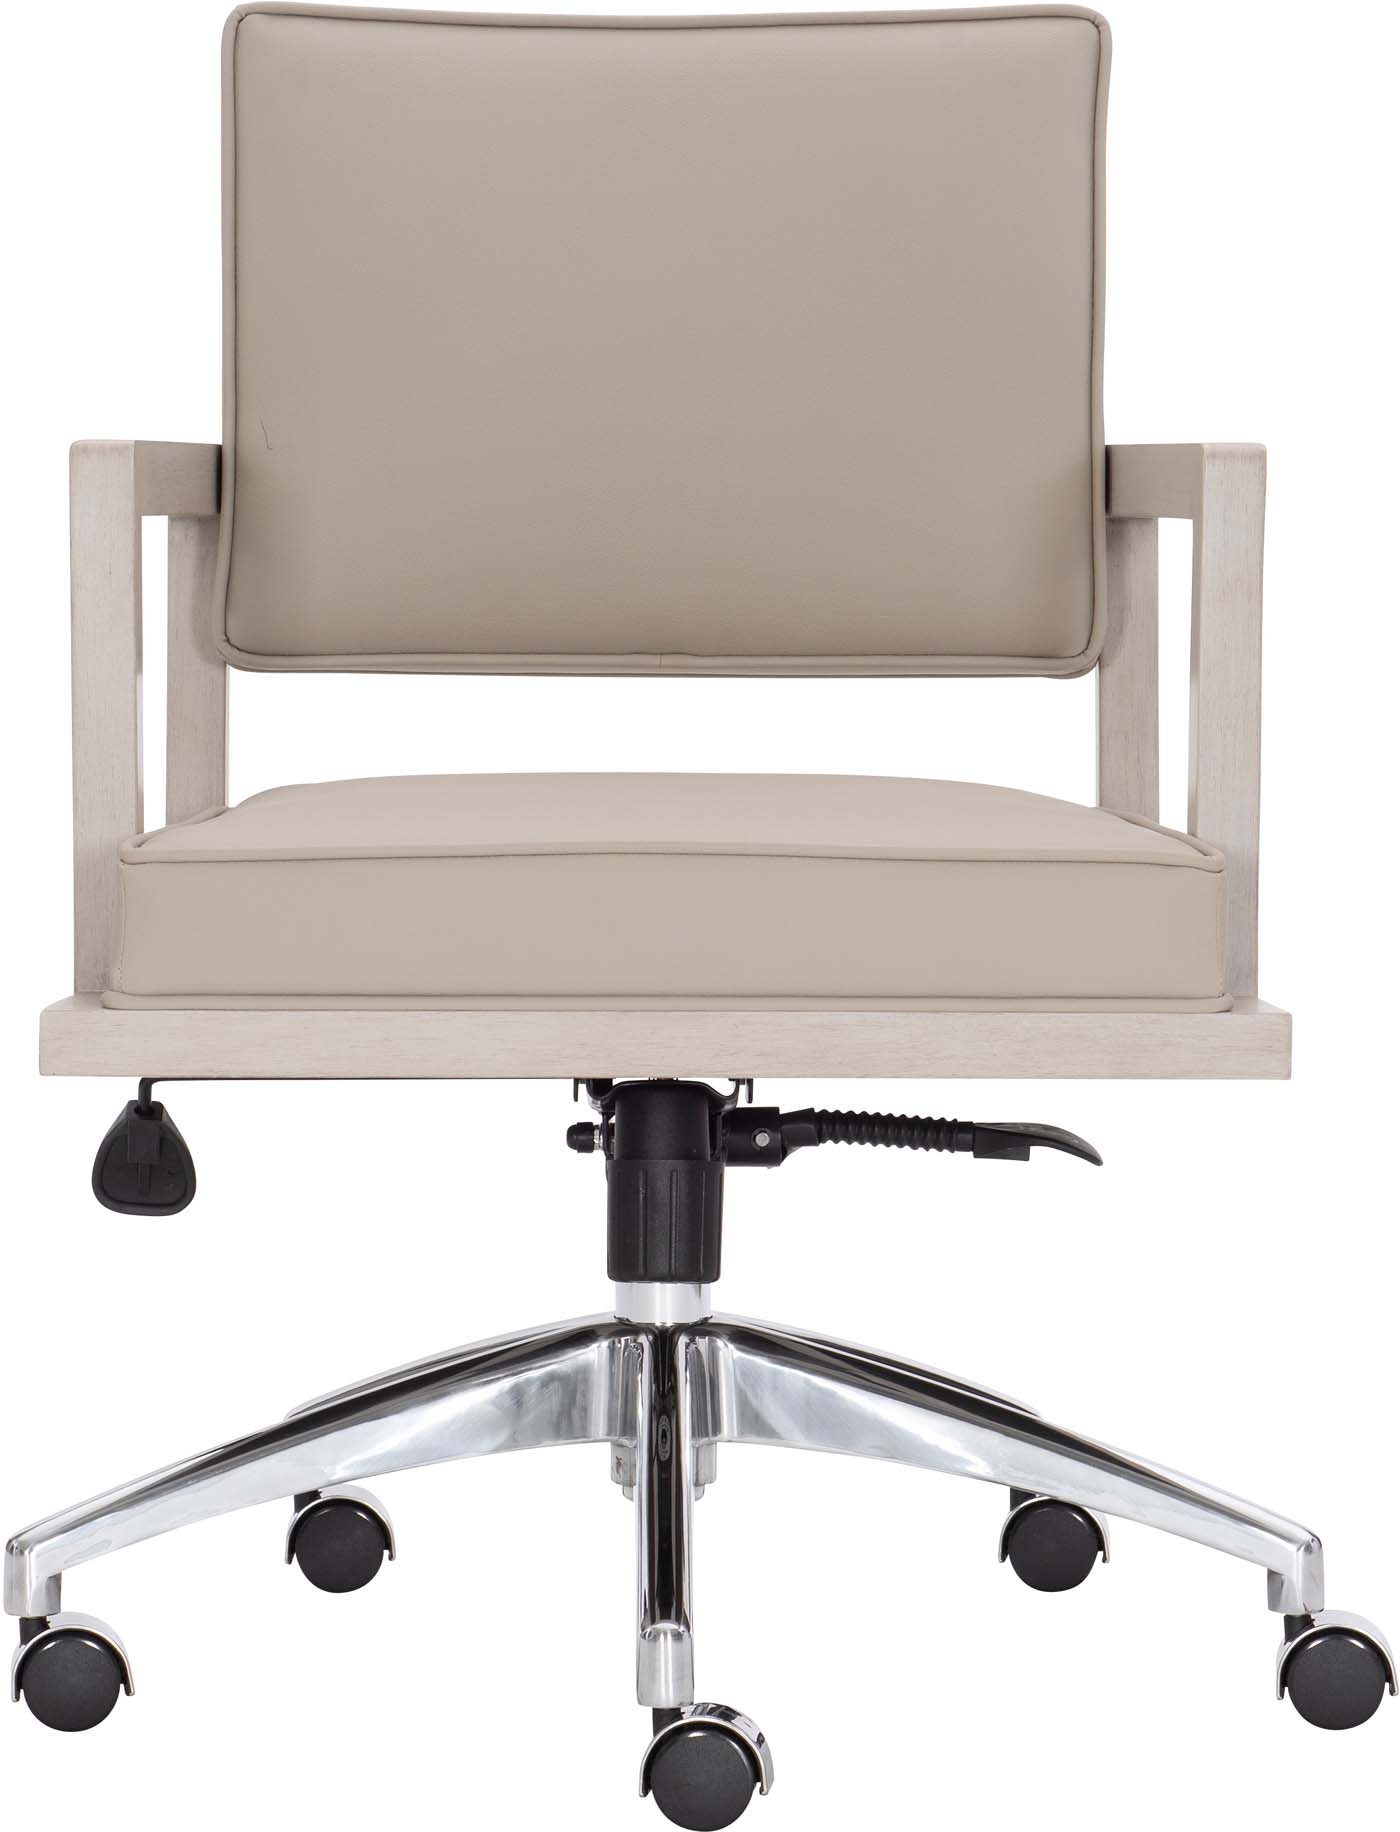 Bernhardt Workspace Home Office Office Chair D11-004 - Austin and Taylor -  London, Ontario